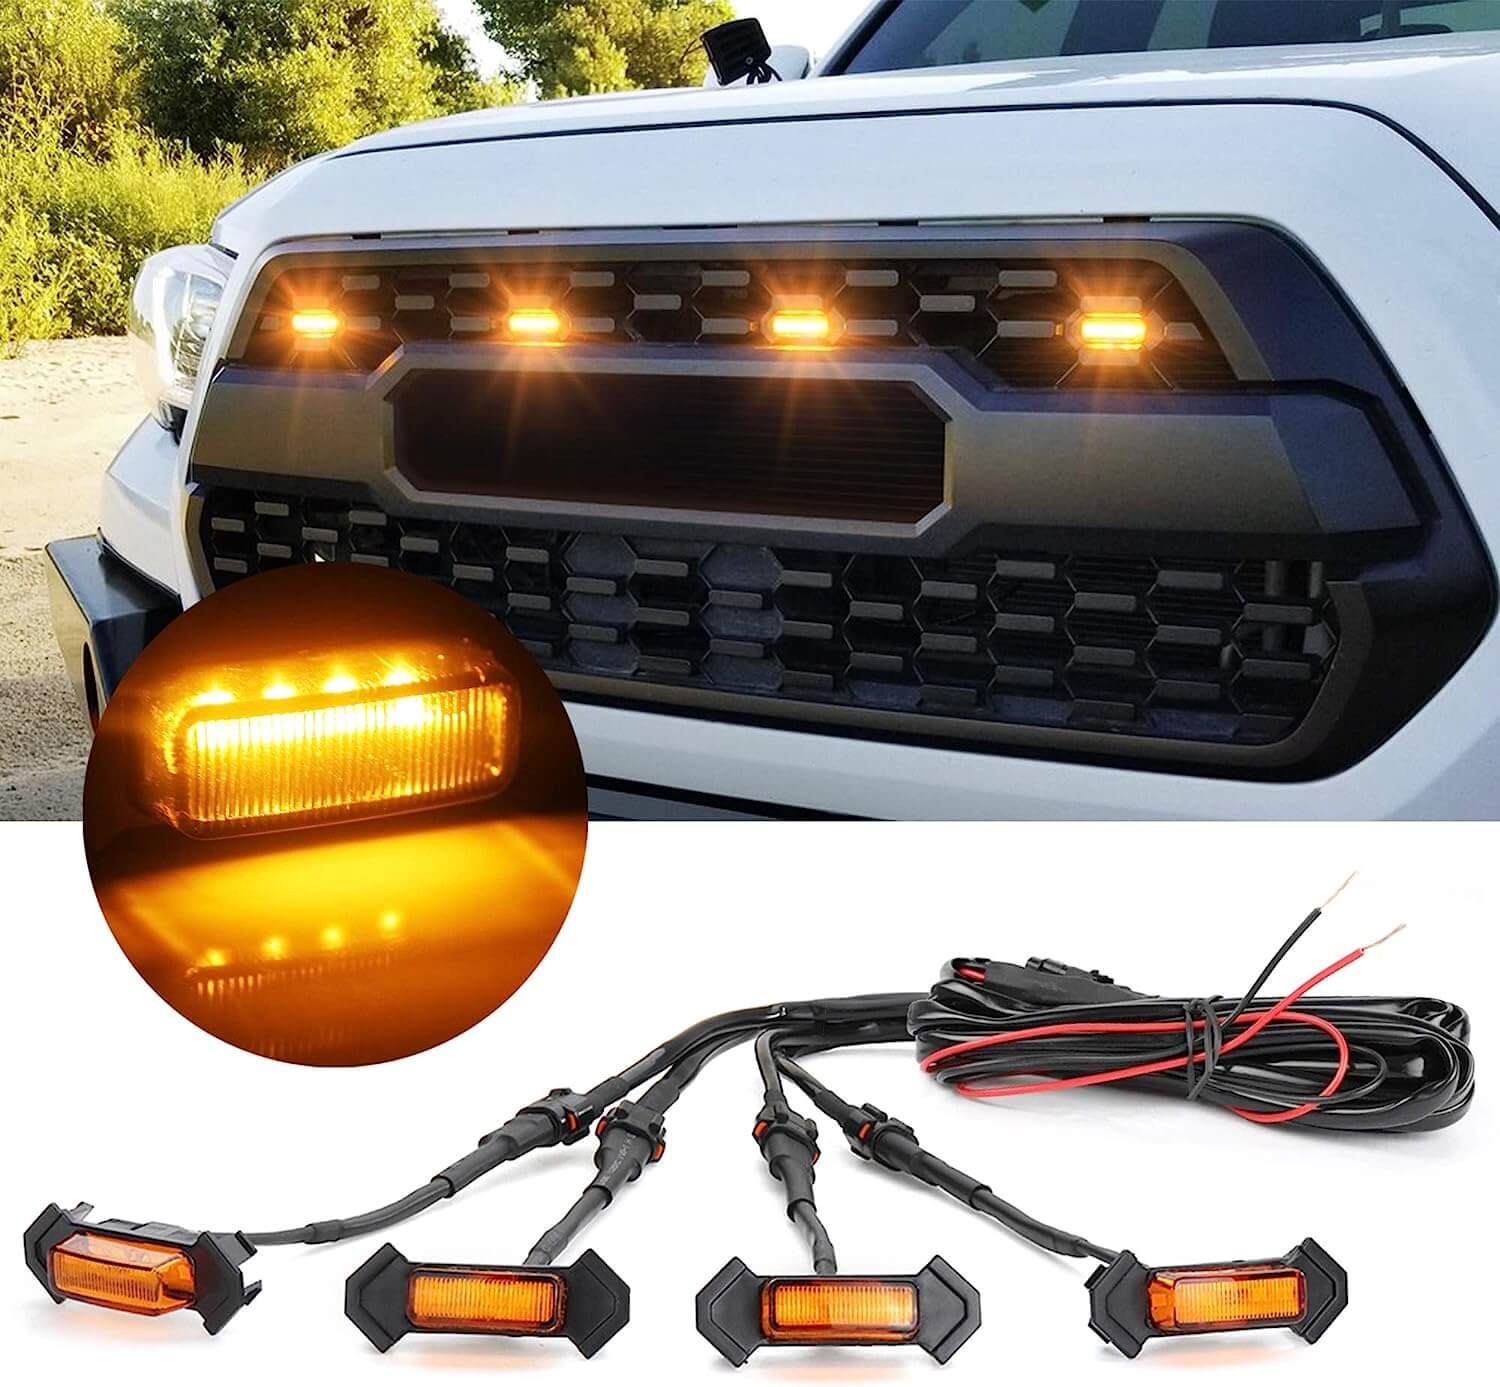 Oxilam Motor Vehicle Lighting OXILAM LED Grille Lights Amber Yellow with Fuse for Tacoma TRD PRO Front Grille 2016 2017 2018 (4PCS, Amber Shell with Amber Light)